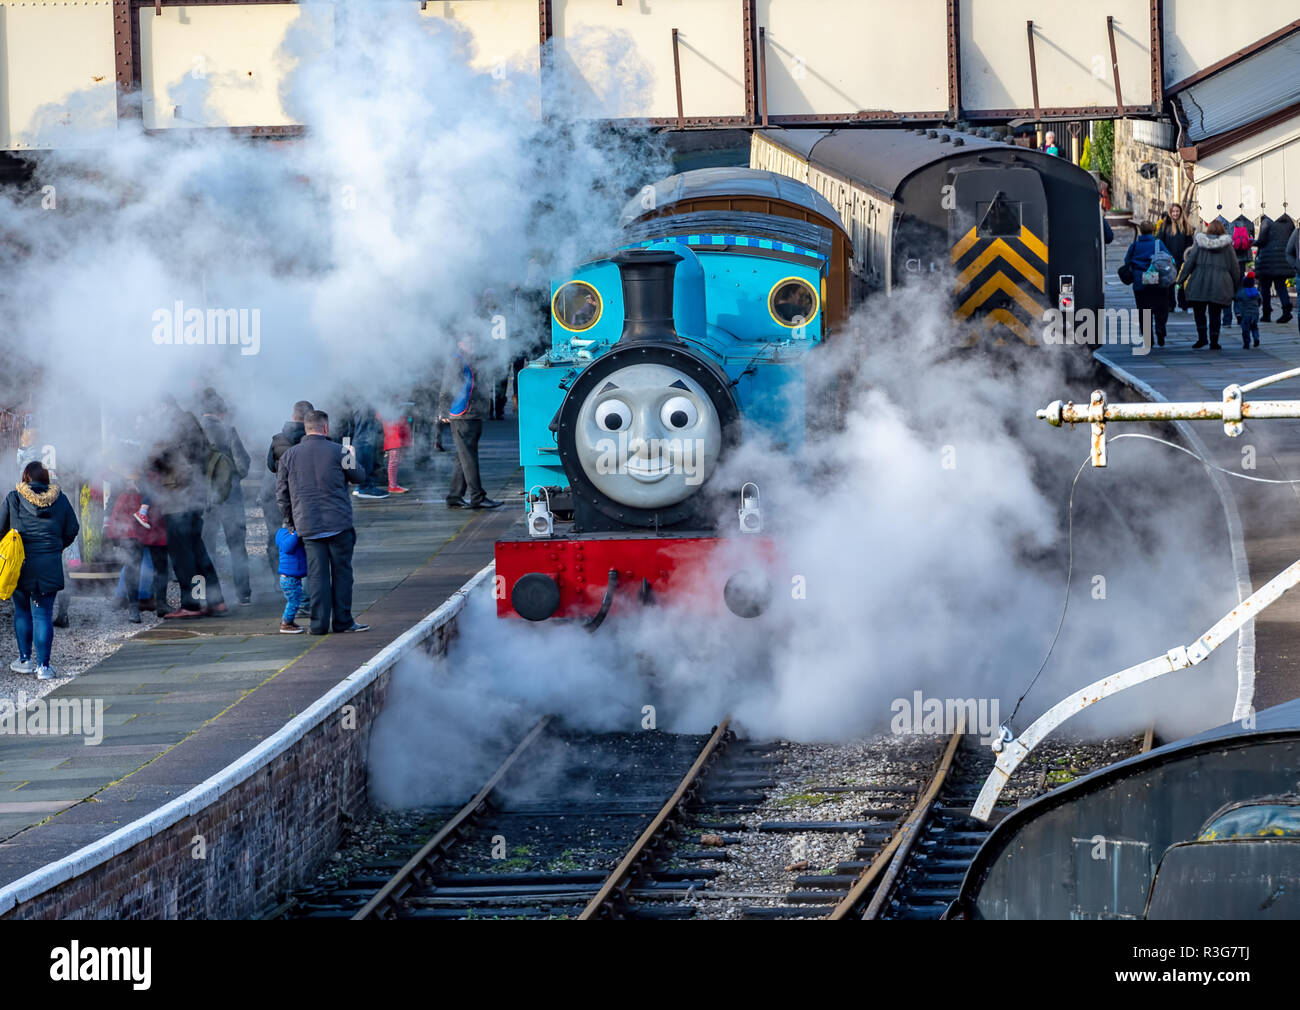 LLANGOLLEN, UK - OCTOBER 27TH 2018: Thomas the Tank Engine on display at the Llangollen railway blowing steam Stock Photo